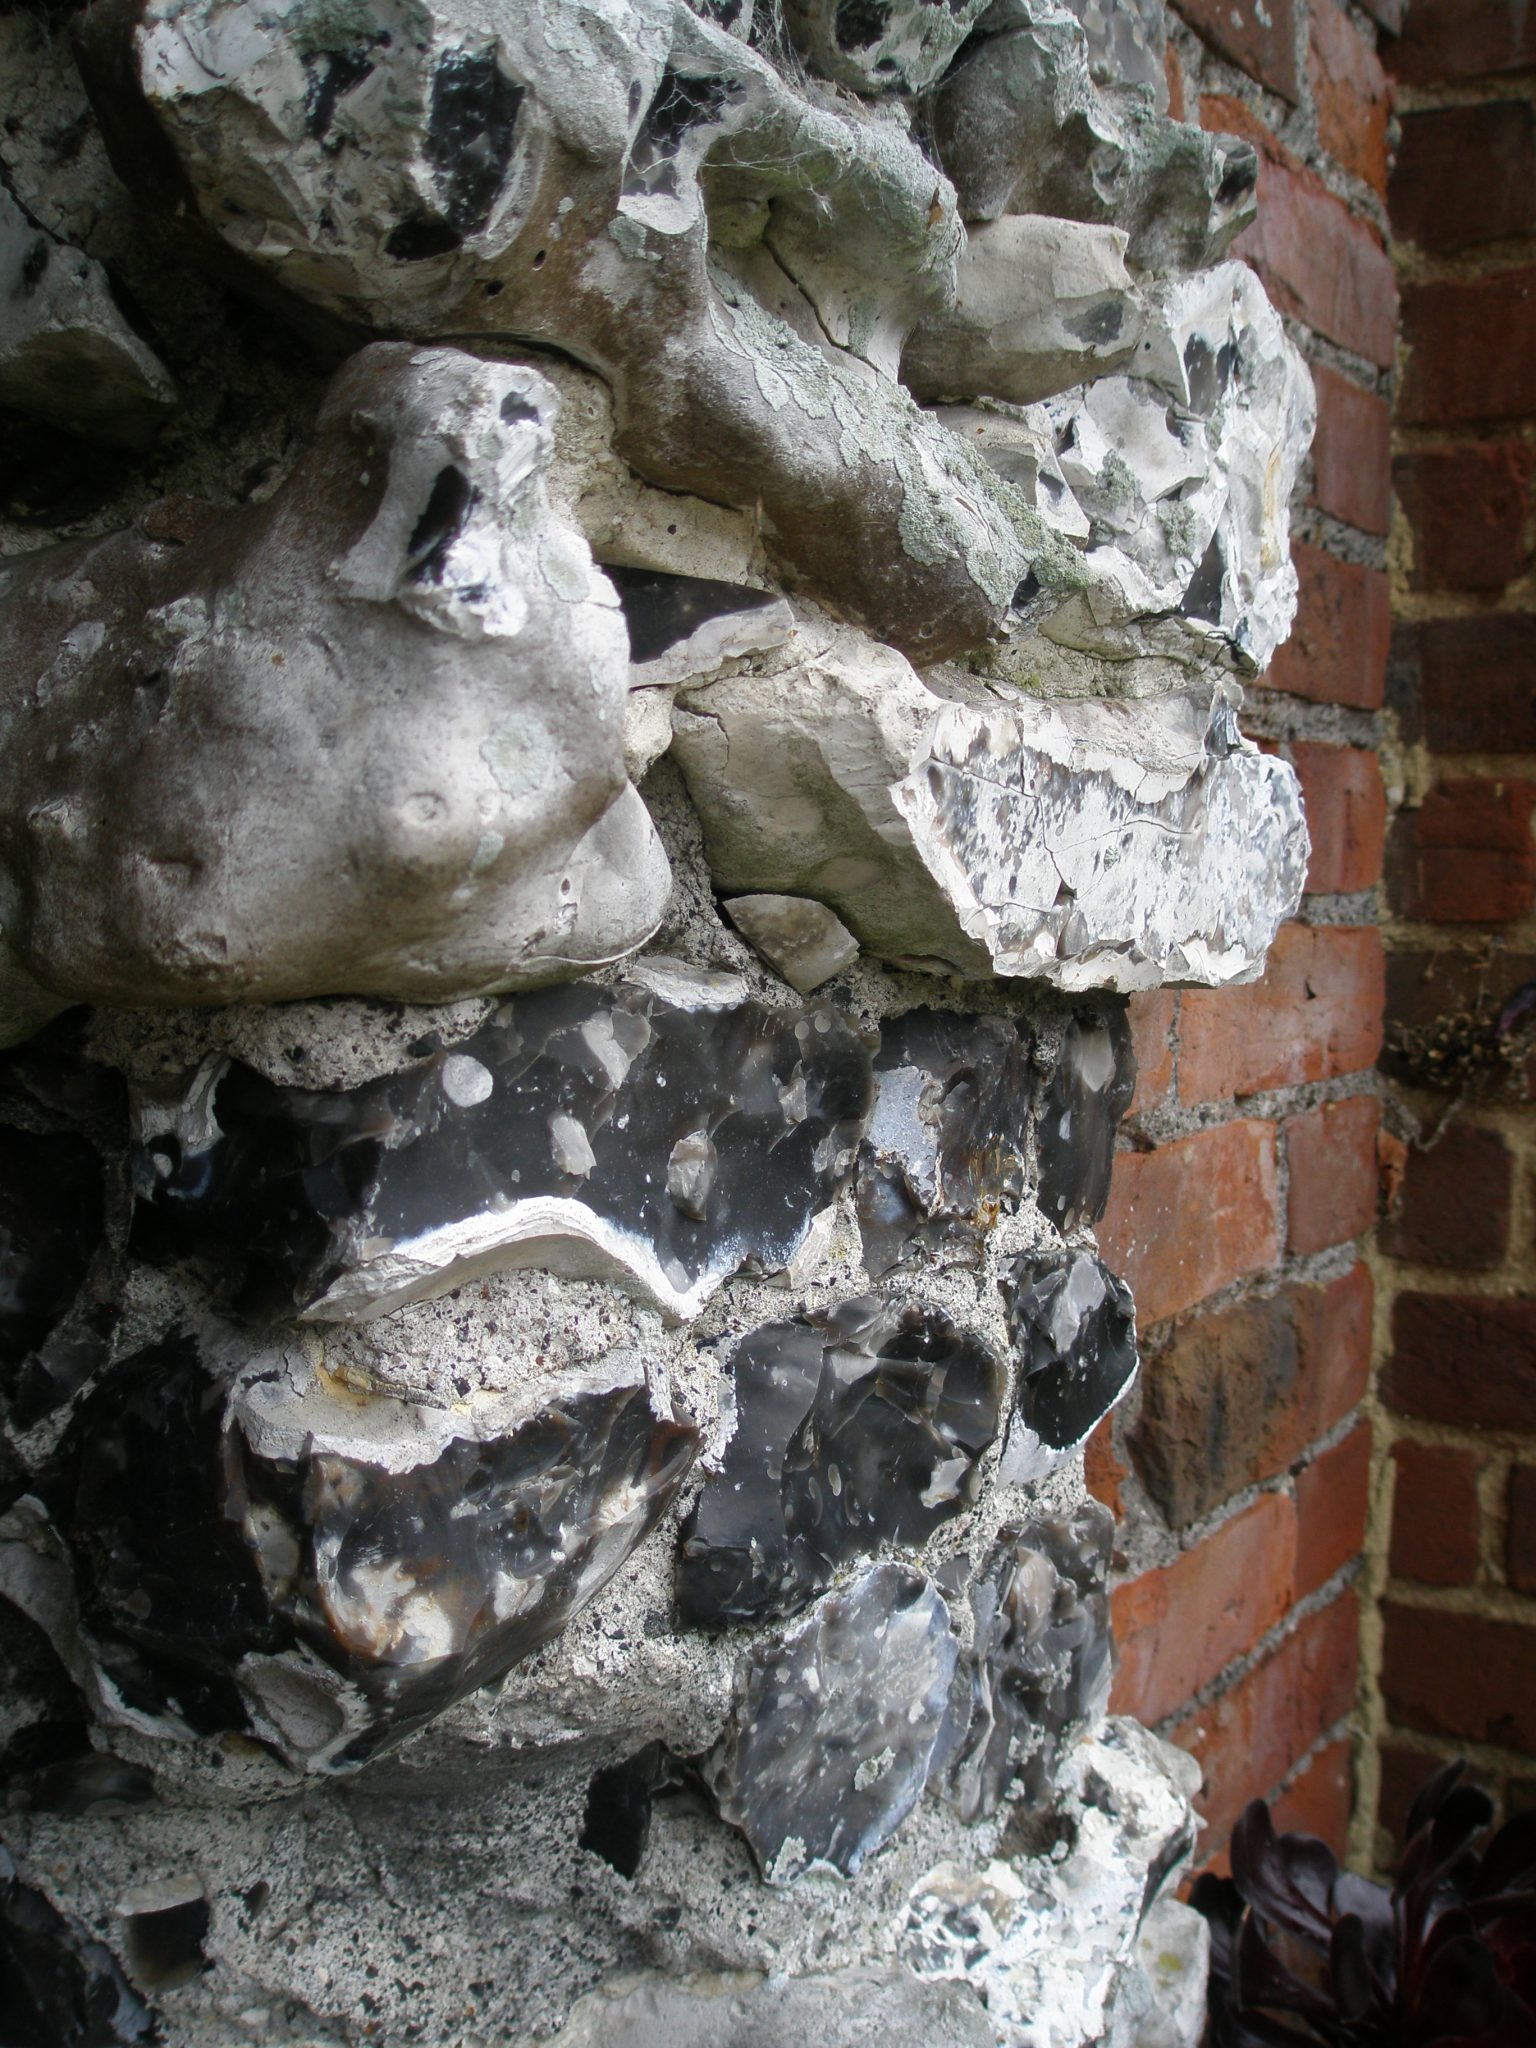 Now I'm Nose-Close, to the amazing split-flint on the Walled Garden archway.